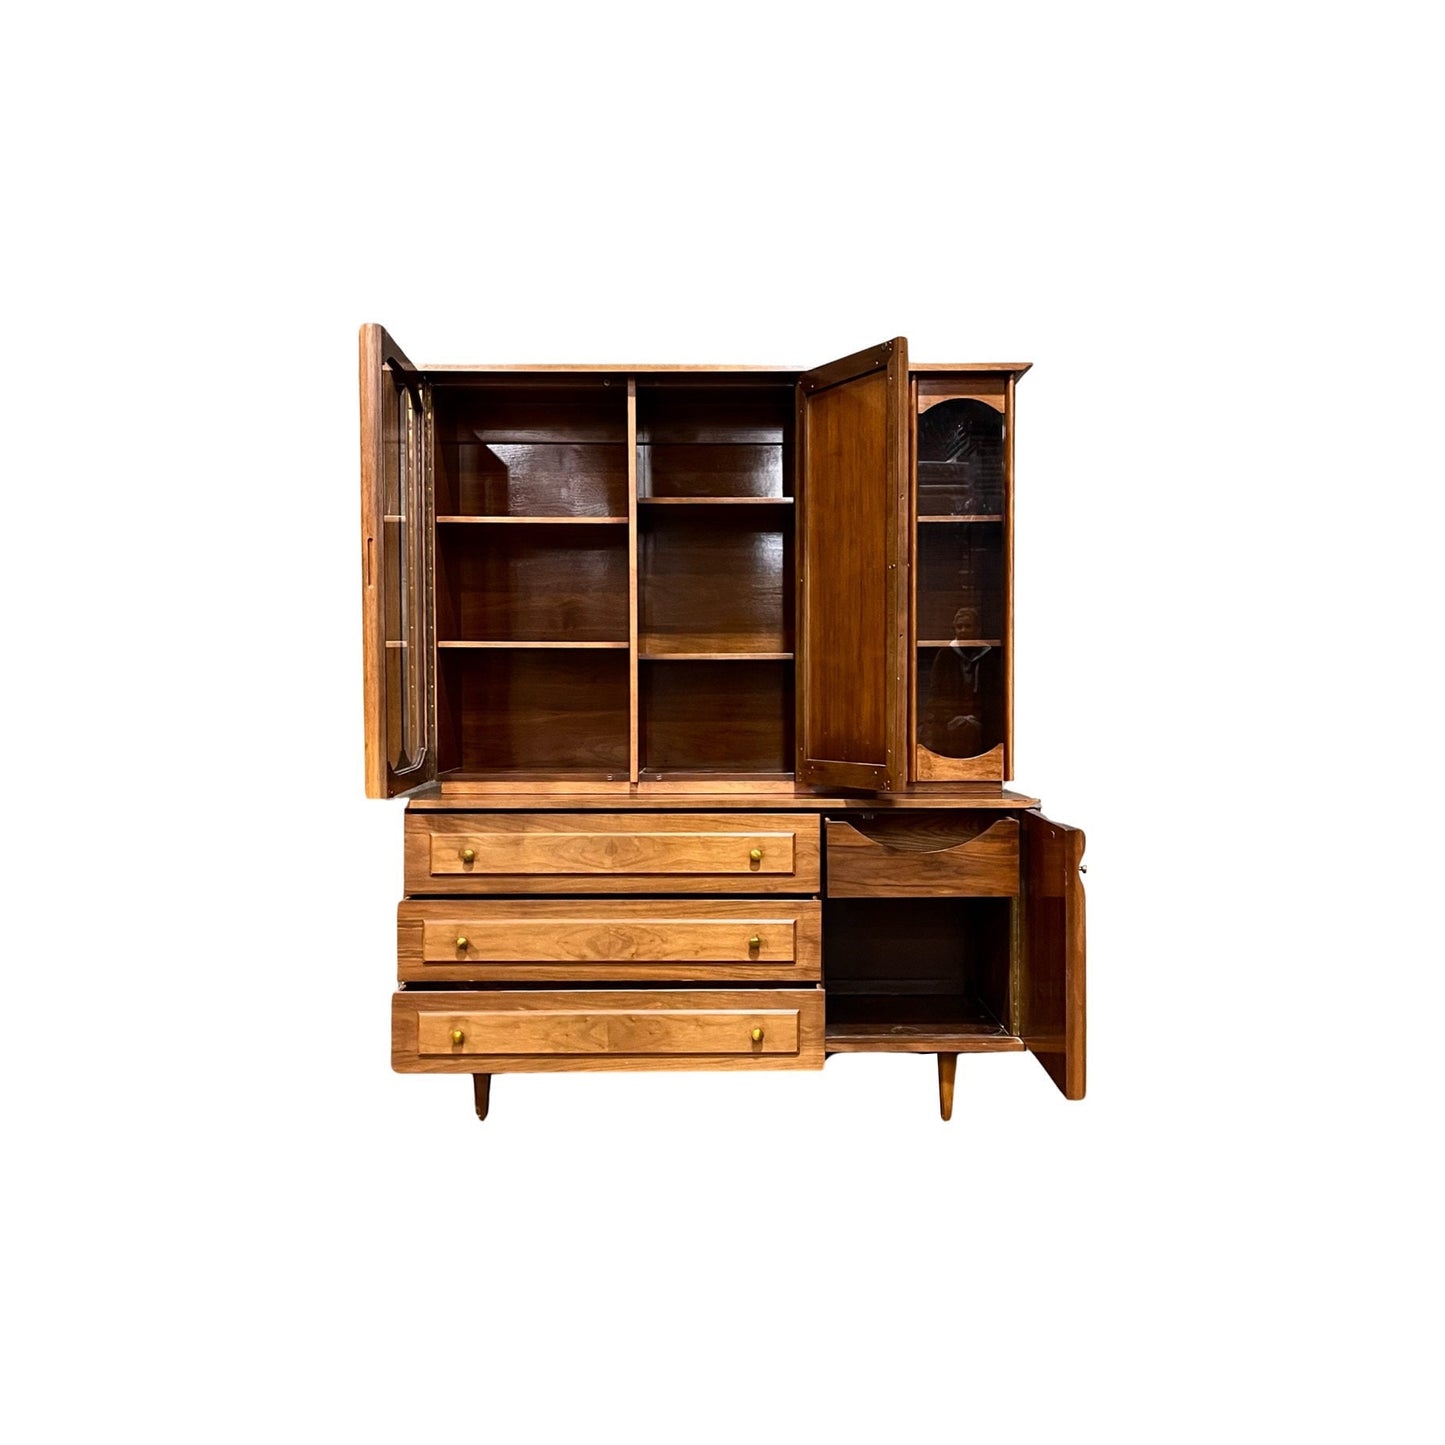 Lower Section with Four Drawers and Spacious Shelf